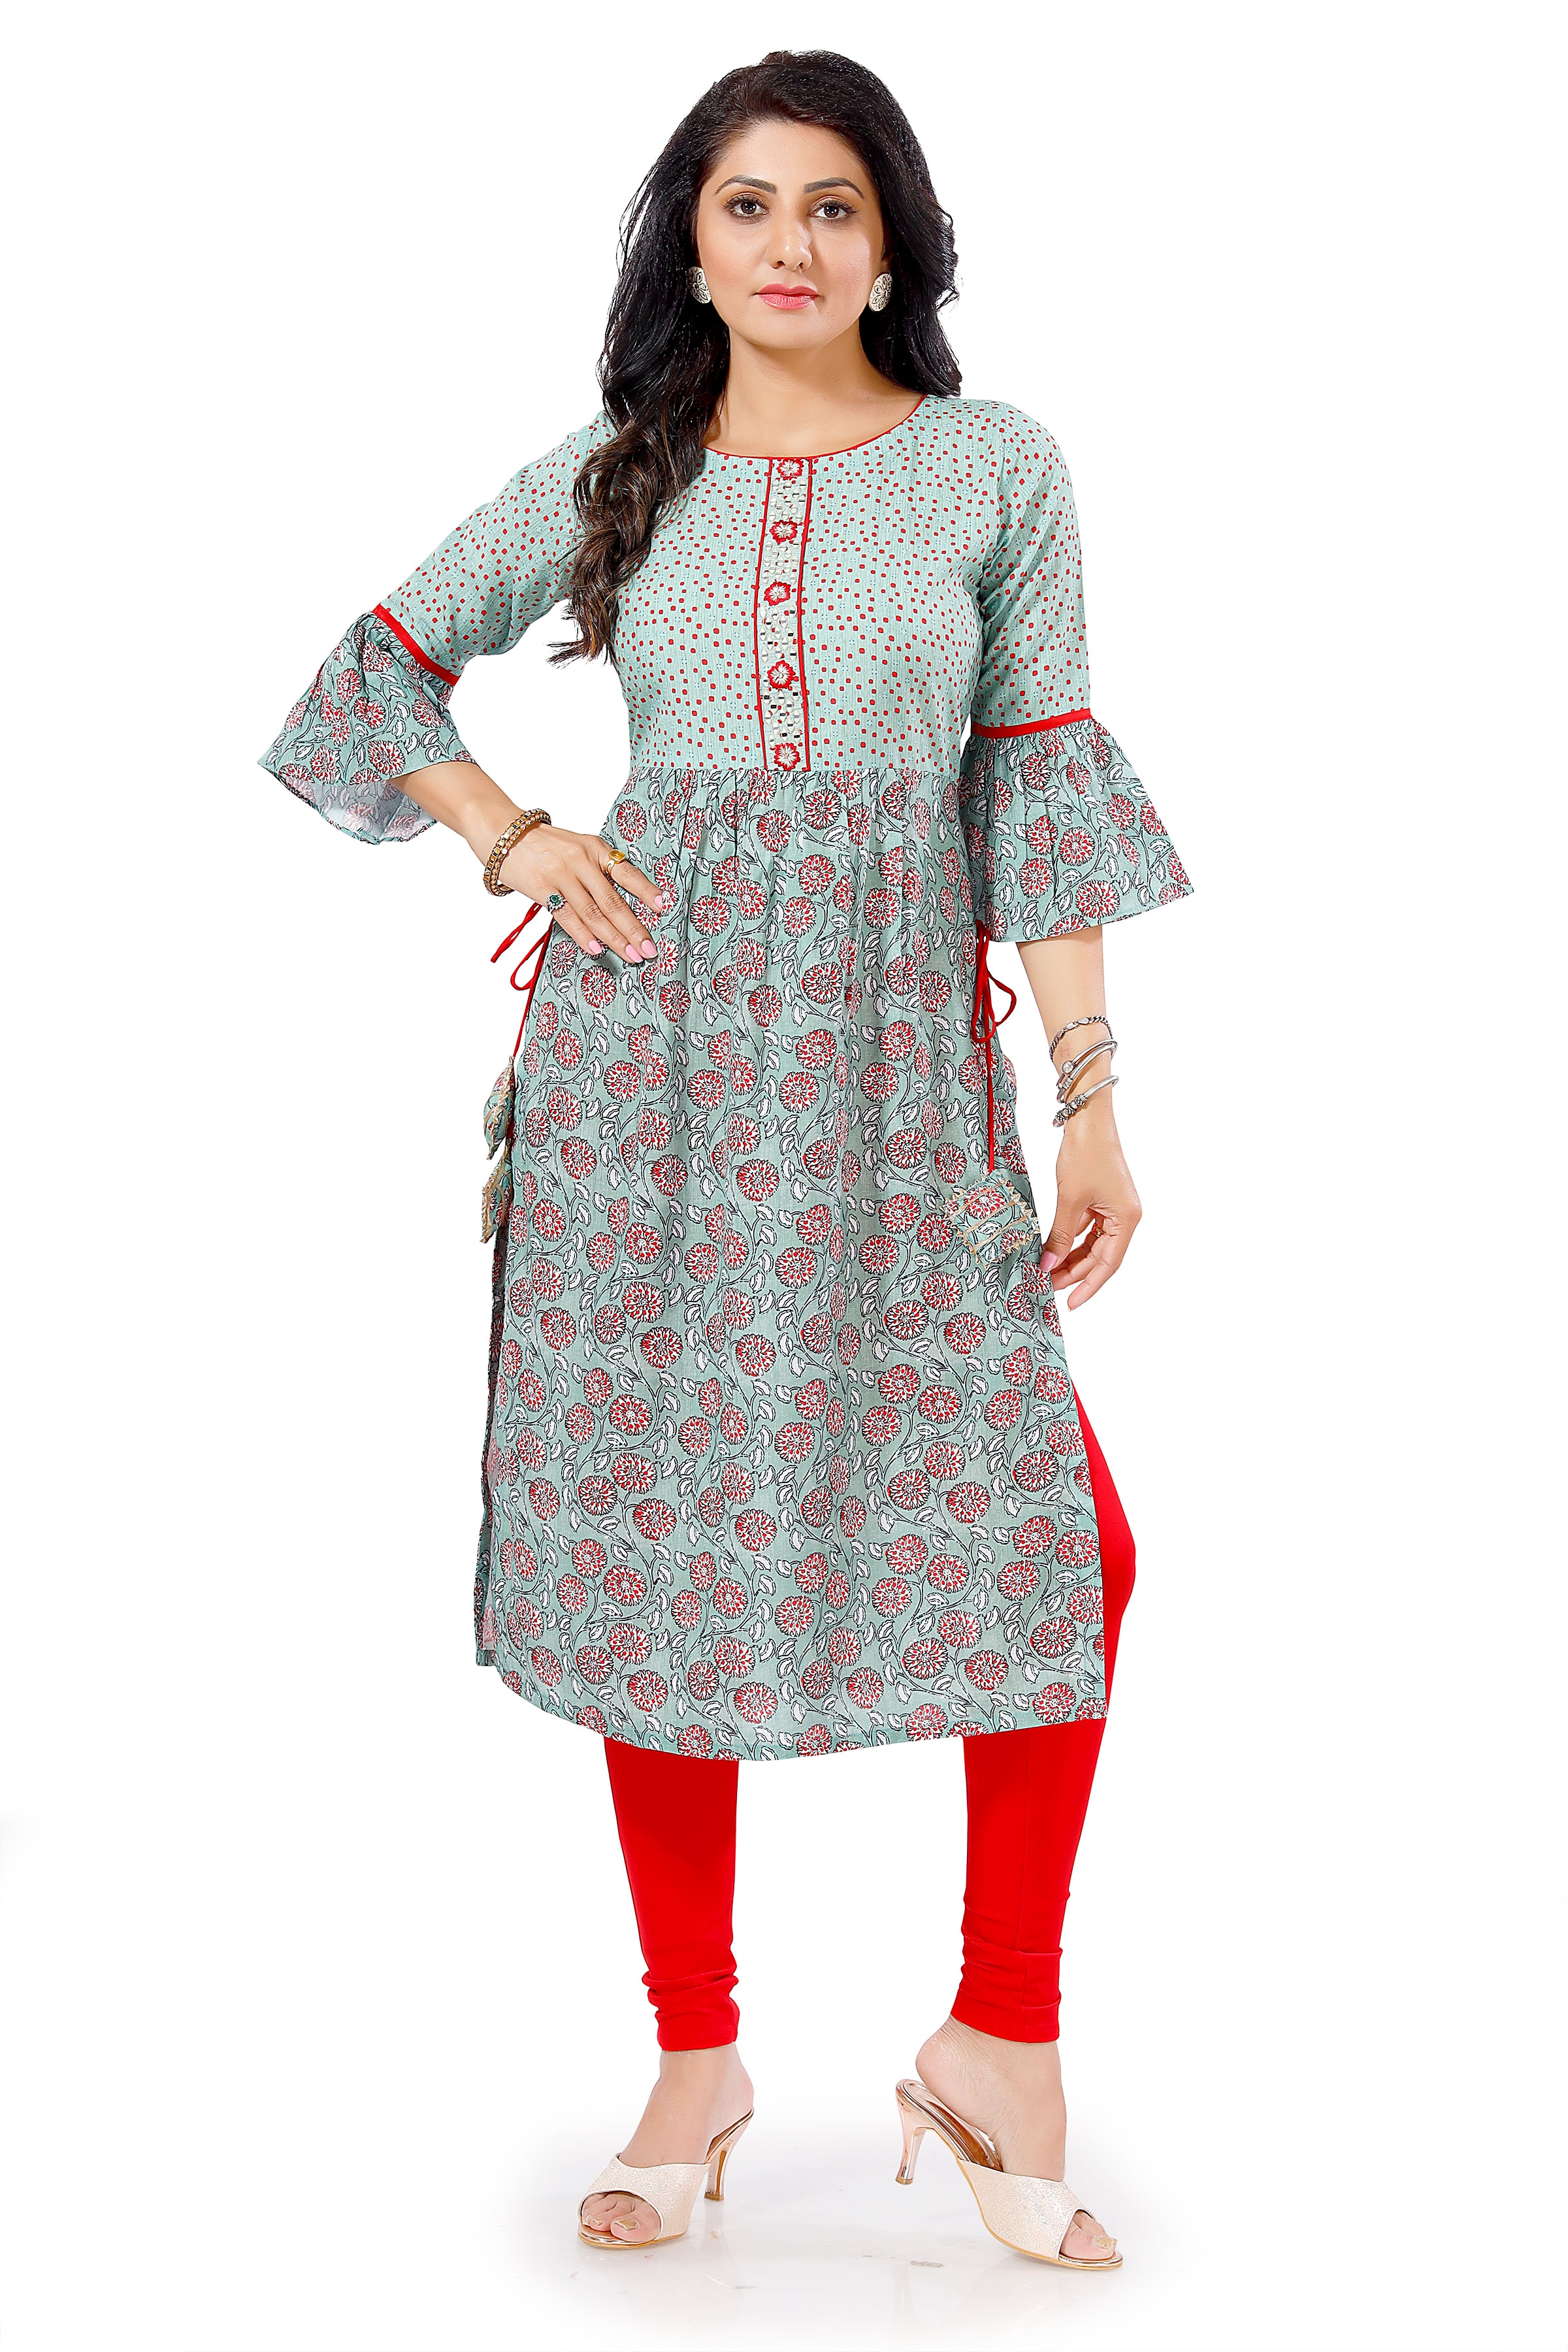 Top 8 Breathtaking Kurtis Patterns to Set a New Trend in Fashion World